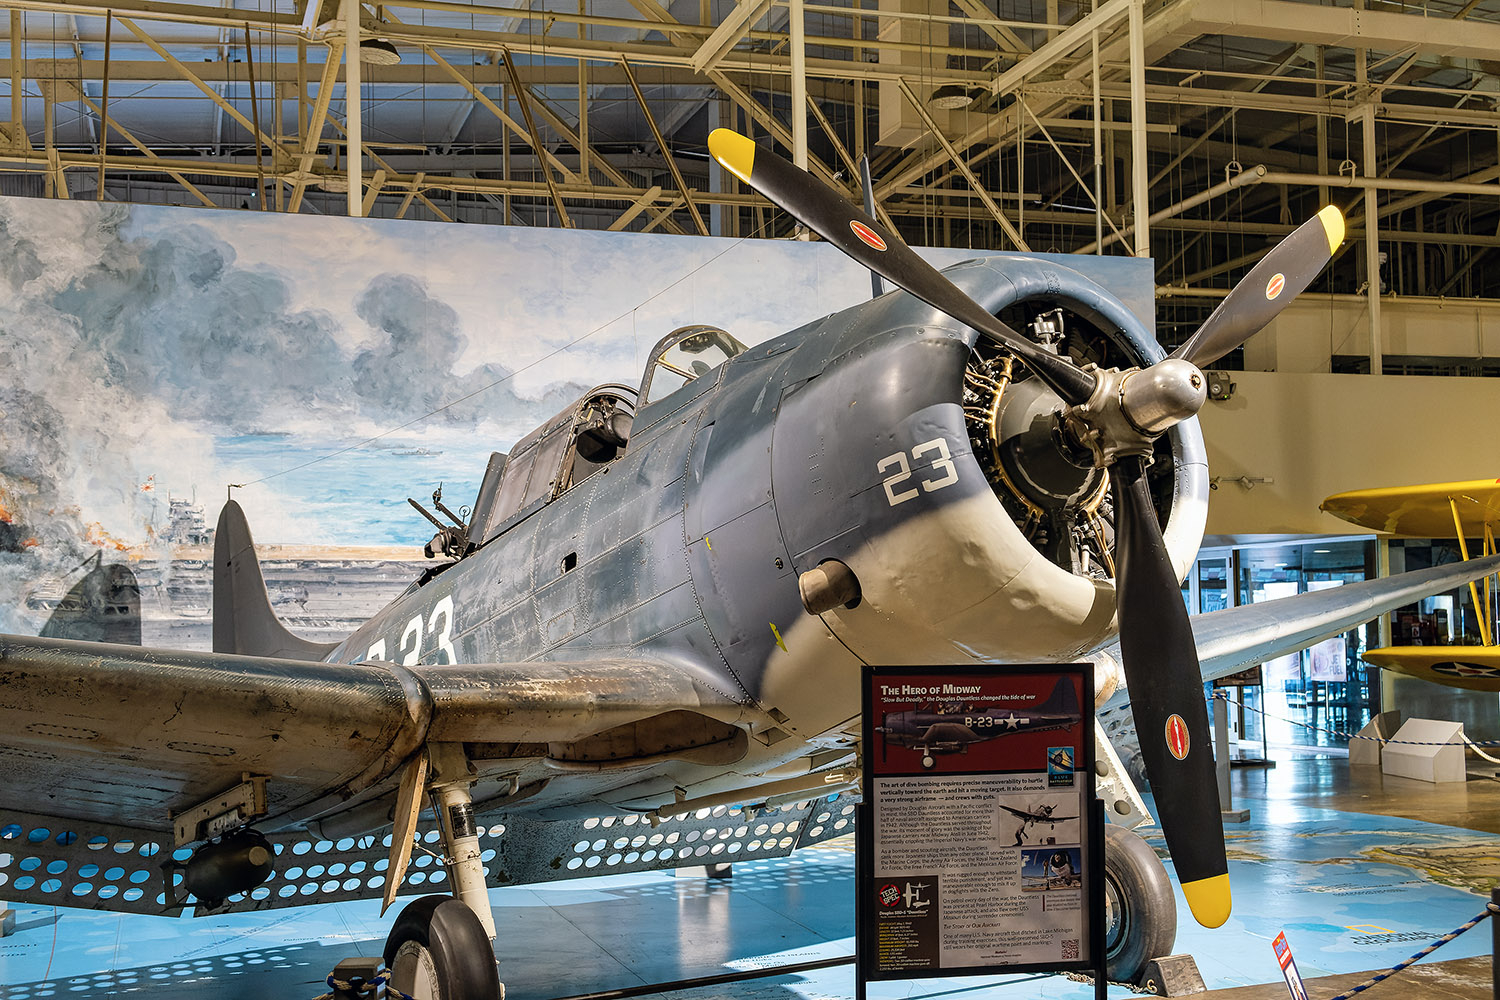 The Douglas SBD Dauntless, a US naval scout plane and dive bomber that was instrumental in winning the battle of Midway